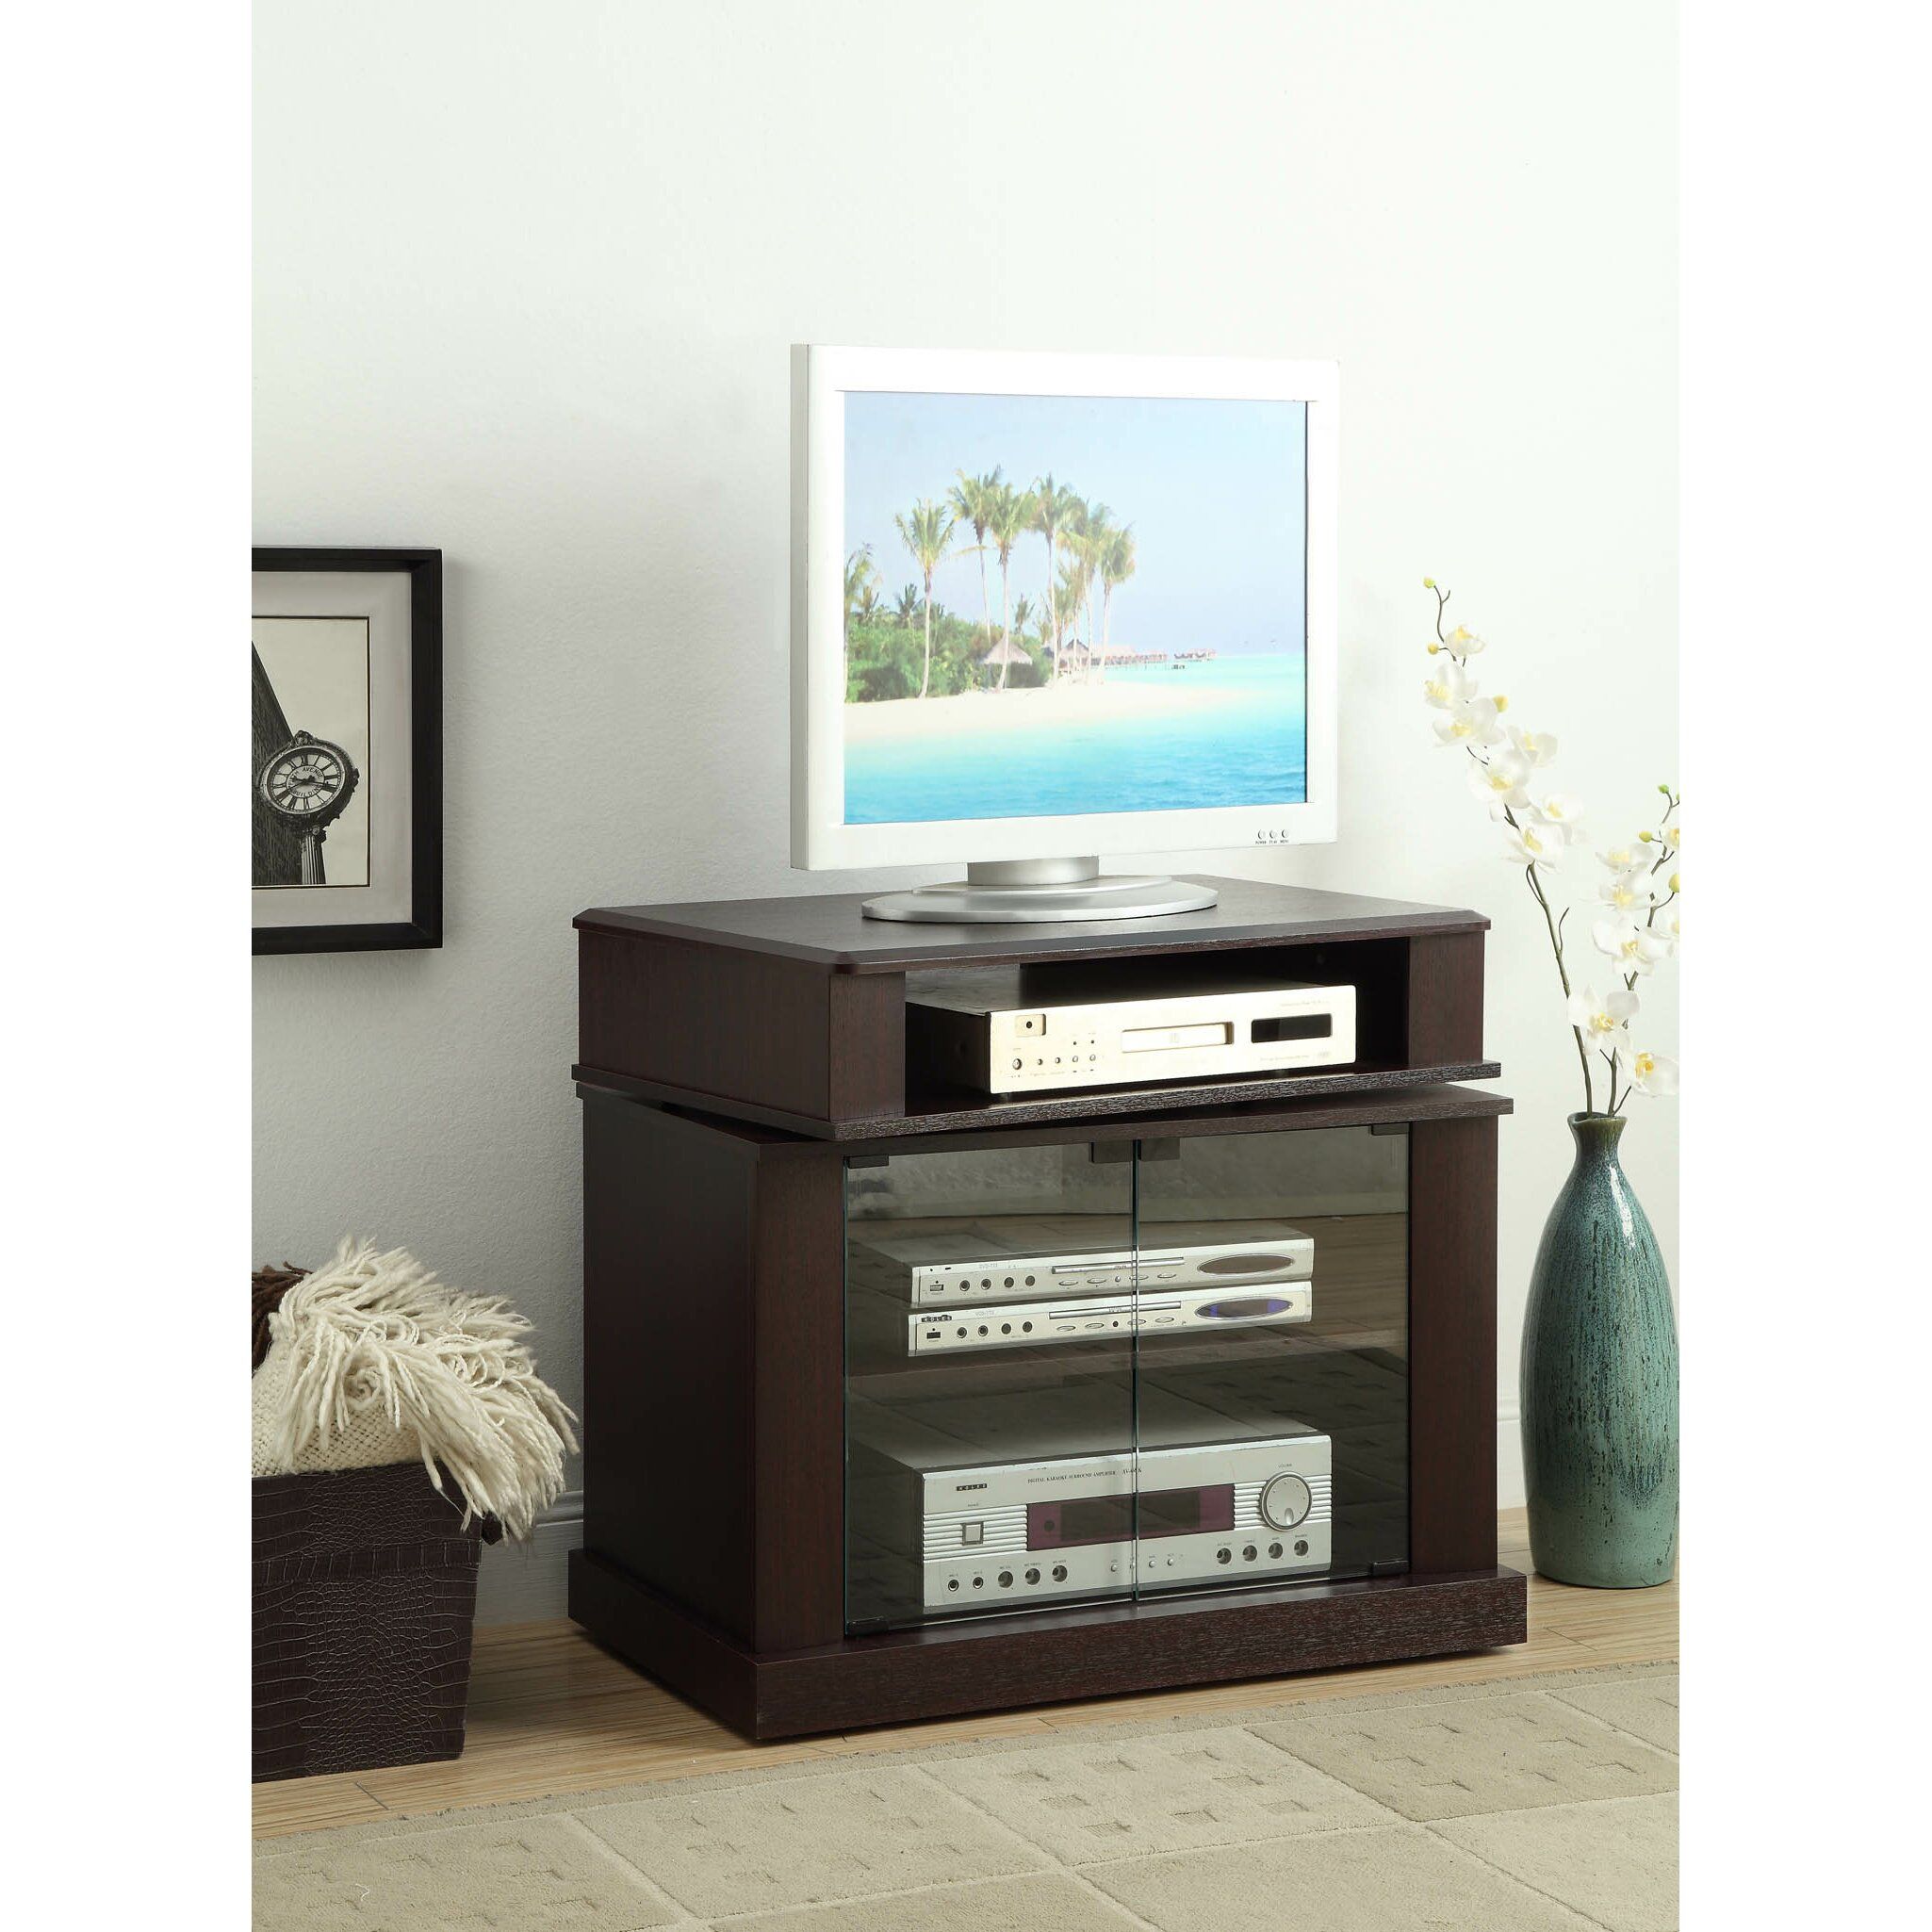 Home Loft Concepts Swivel Top Tv Stand & Reviews | Wayfair With Regard To Swivel Tv Stands With Mount (View 11 of 15)